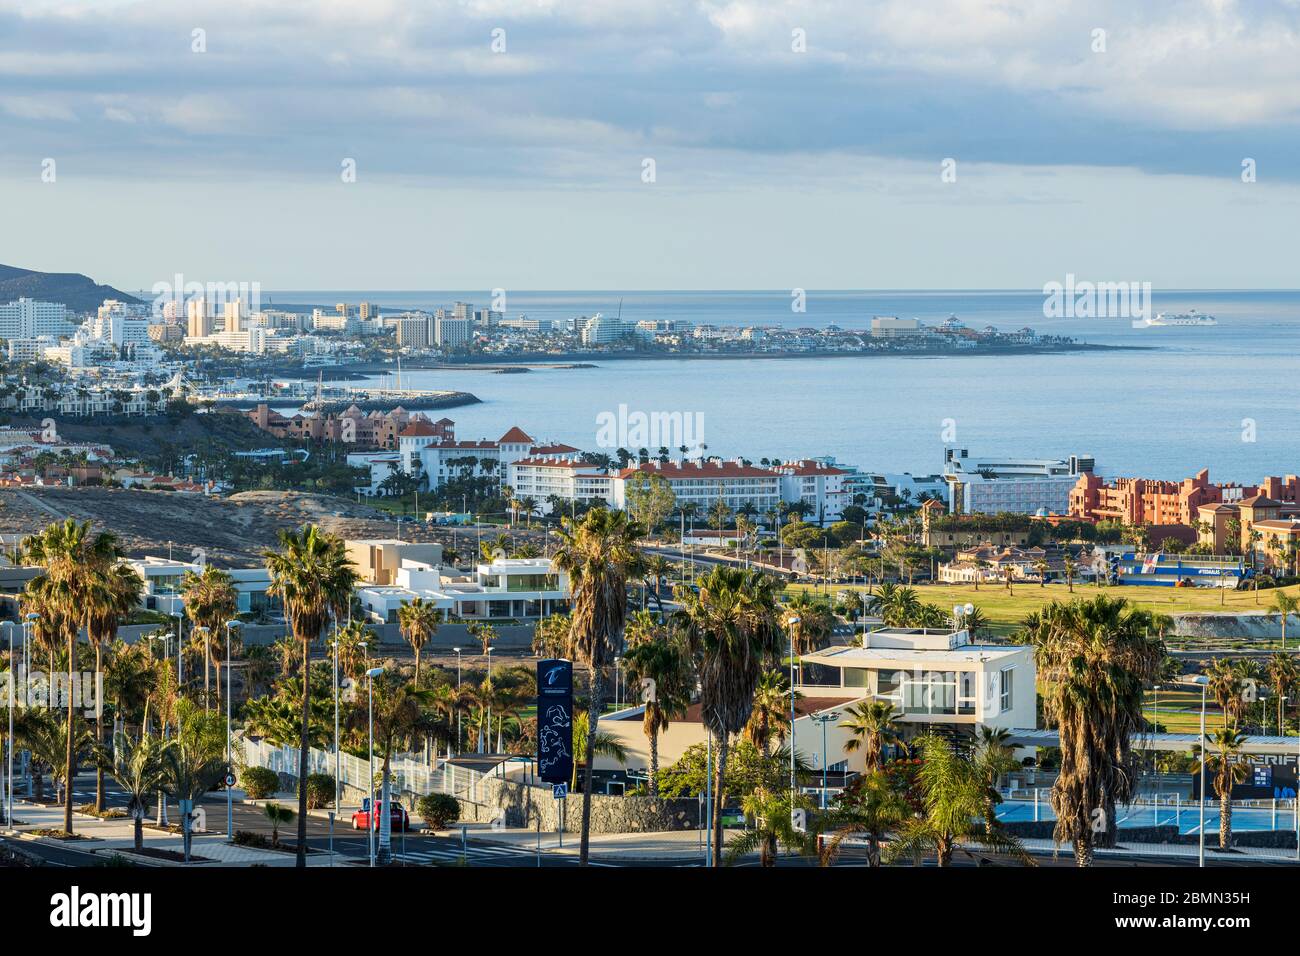 View over the coastal resorts at dawn during the covid 19 lockdown in the tourist resort area of Costa Adeje, Tenerife, Canary Islands, Spain Stock Photo